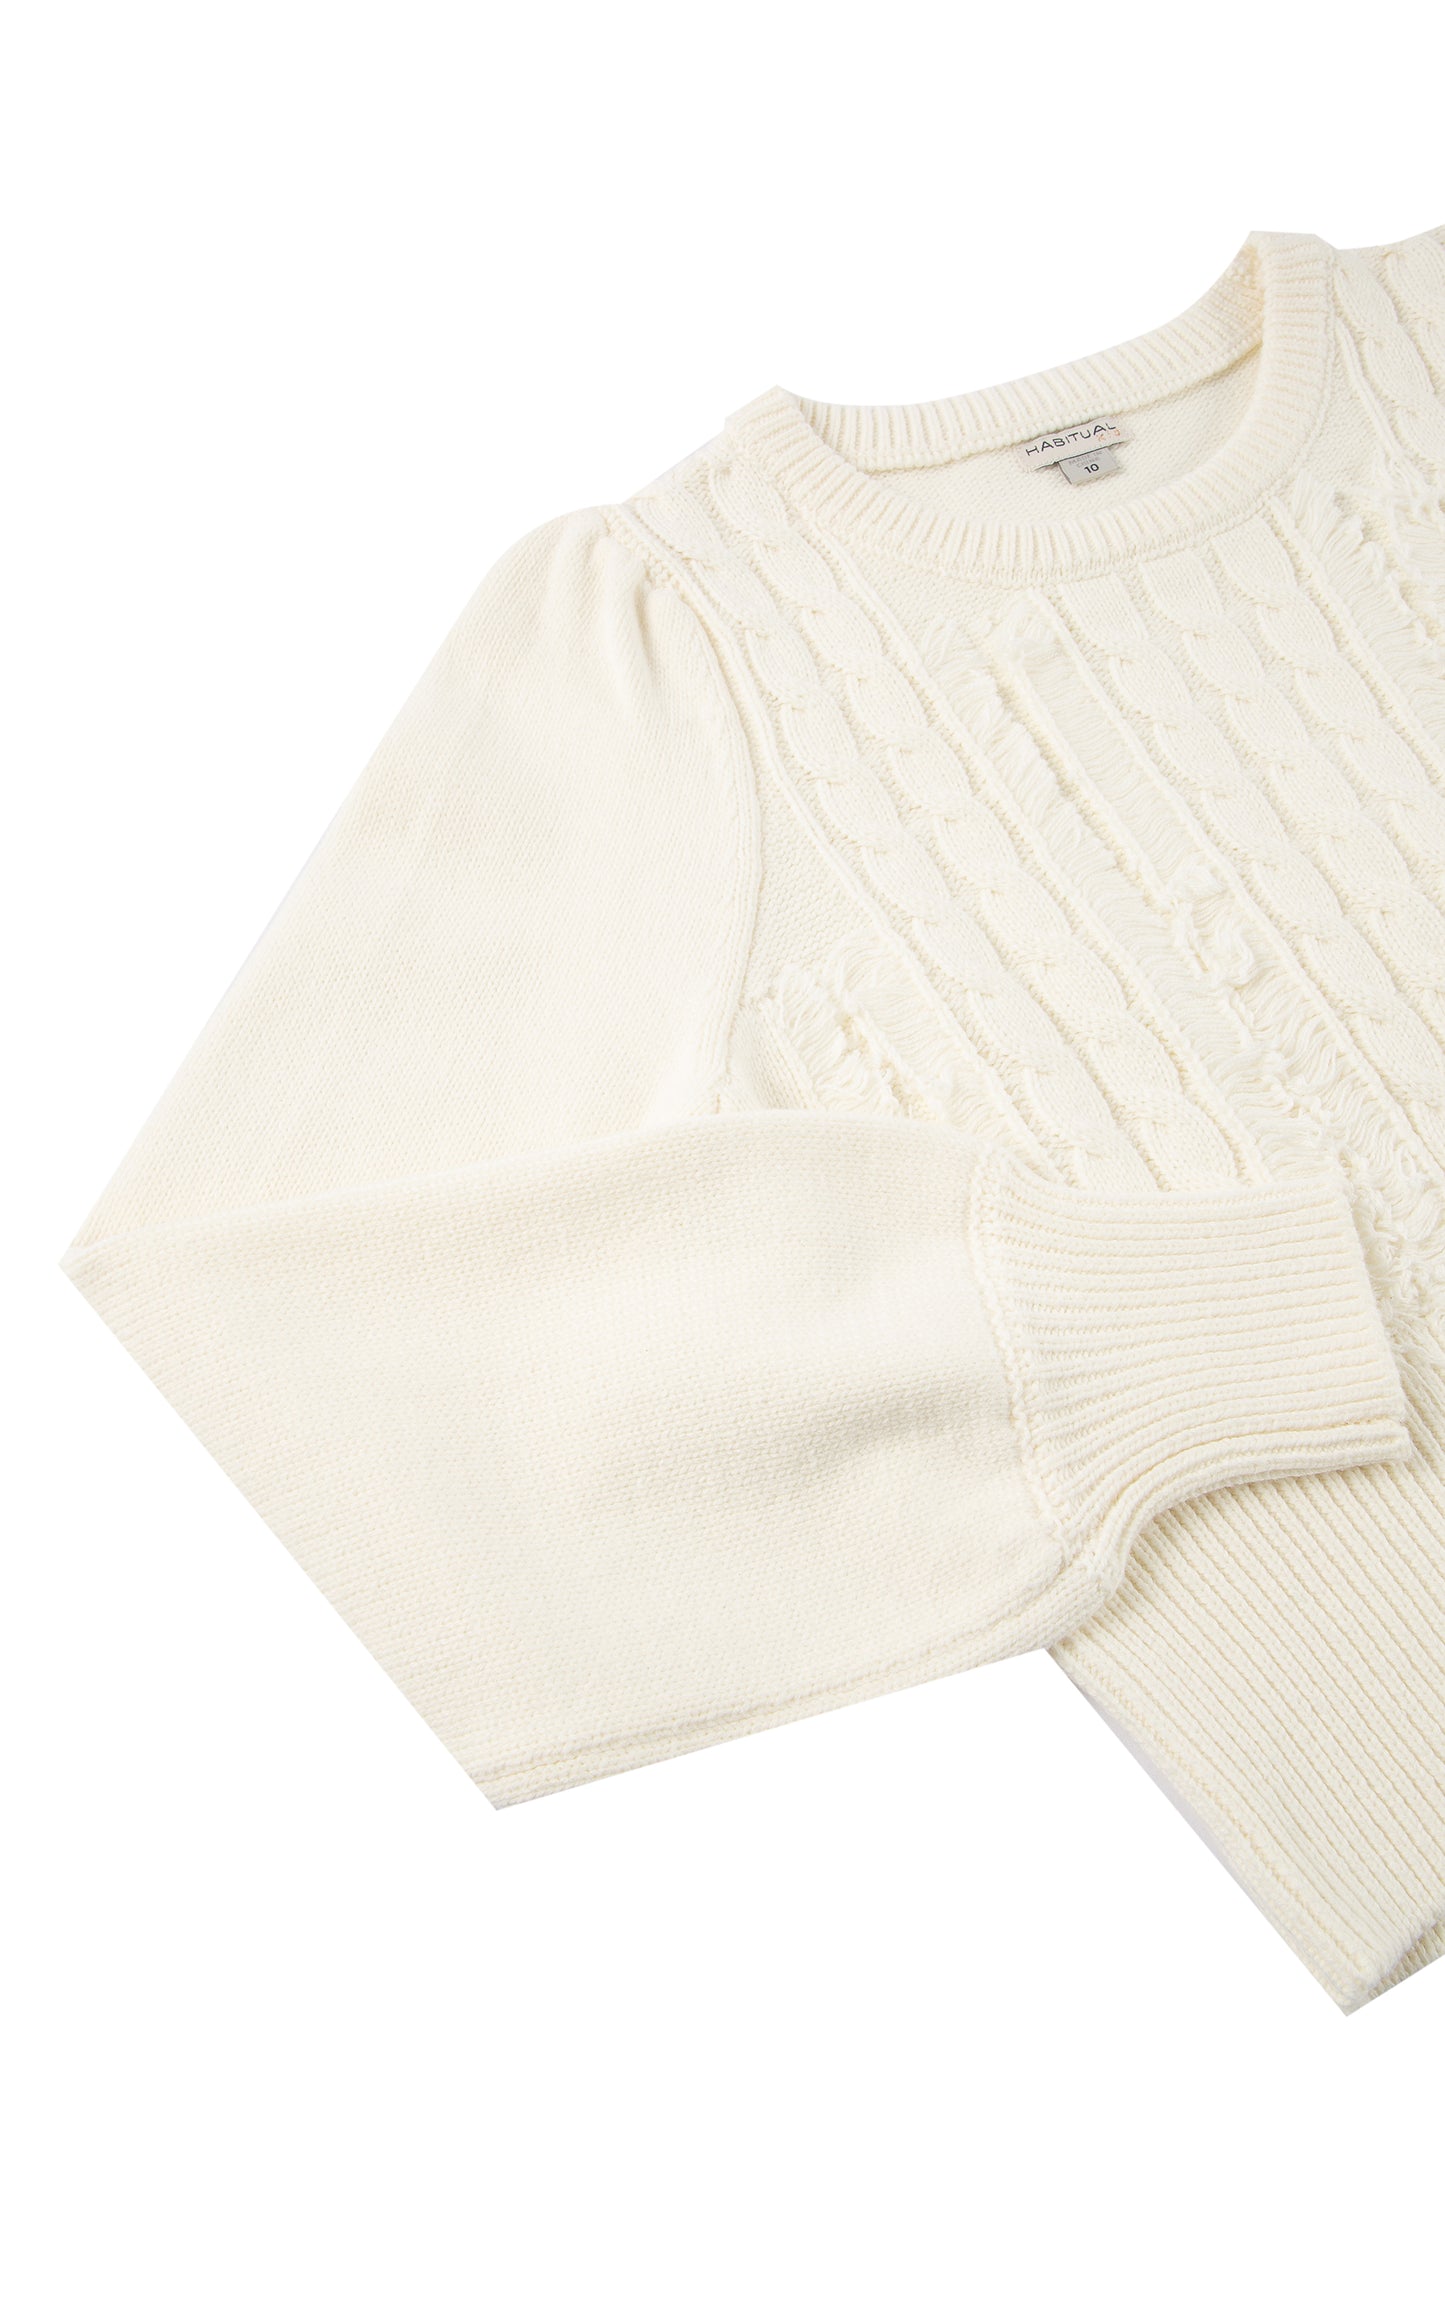 Detail view of an off-white cable-knit sweater with fringe detailing